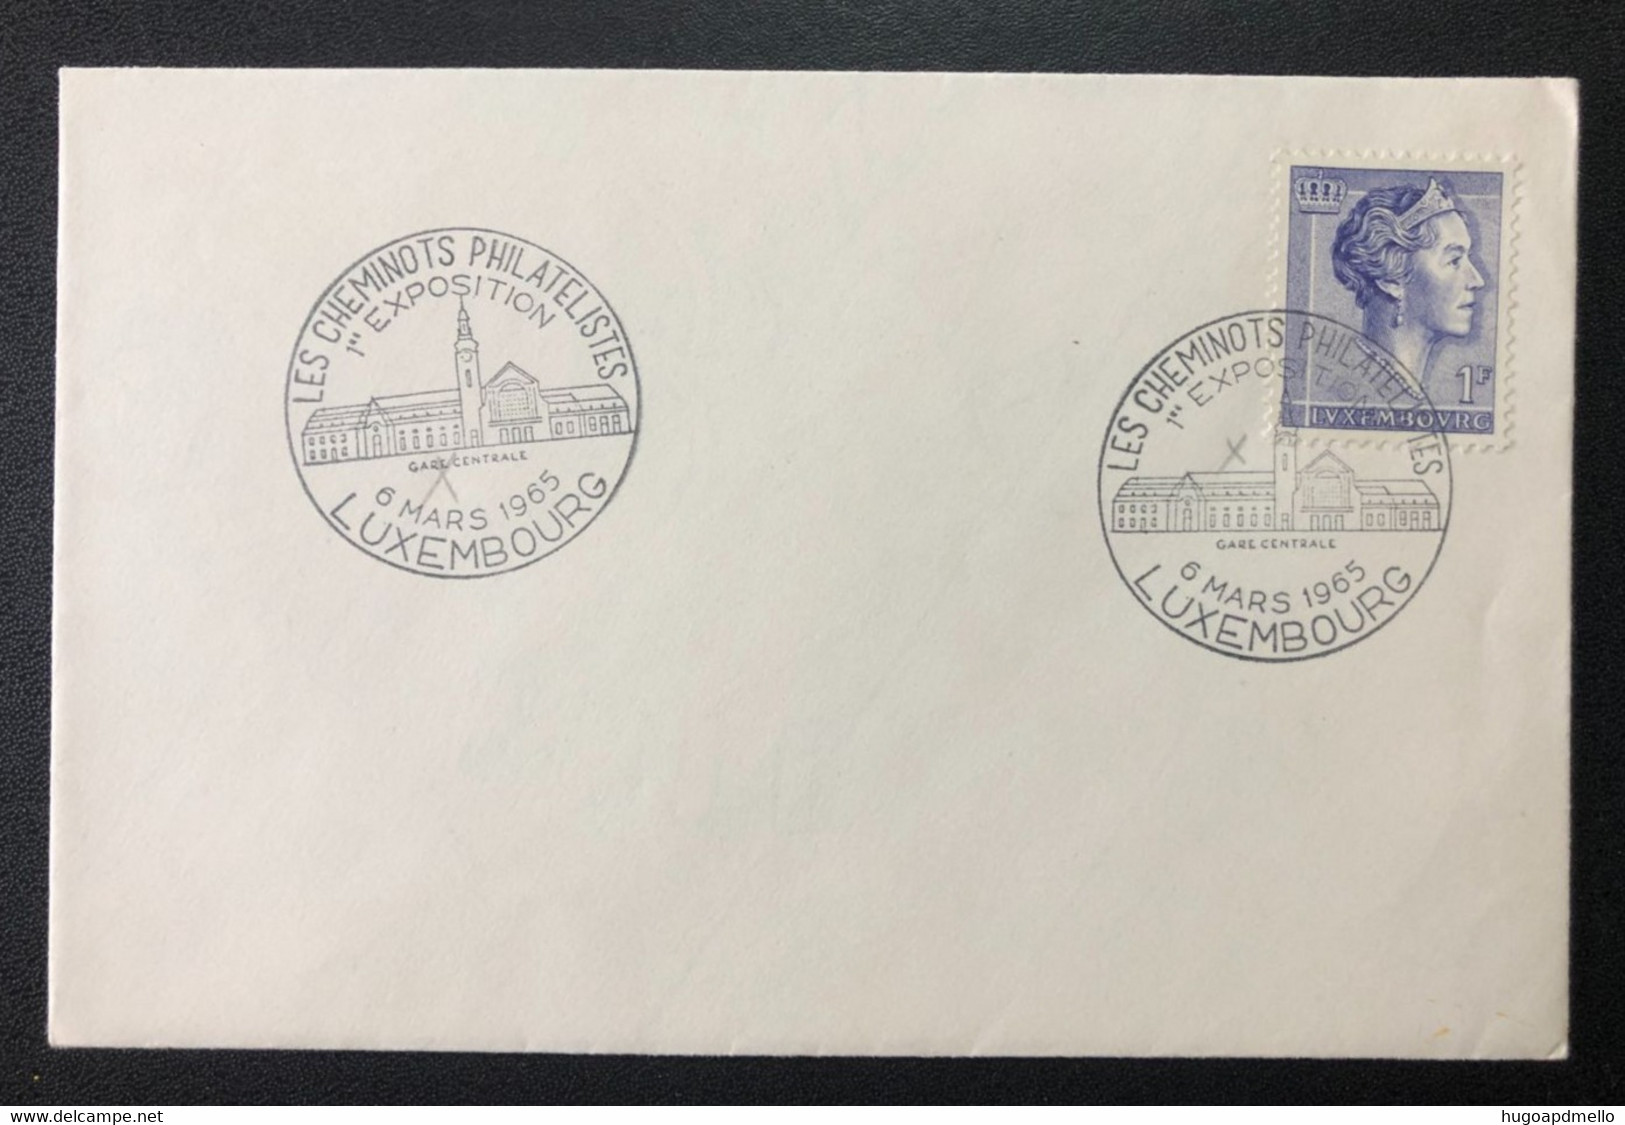 LUXEMBOURG, «1ère Exposition Les Cheminots Philatelistes »,  With Special Postmark, 1965 - Cartas & Documentos